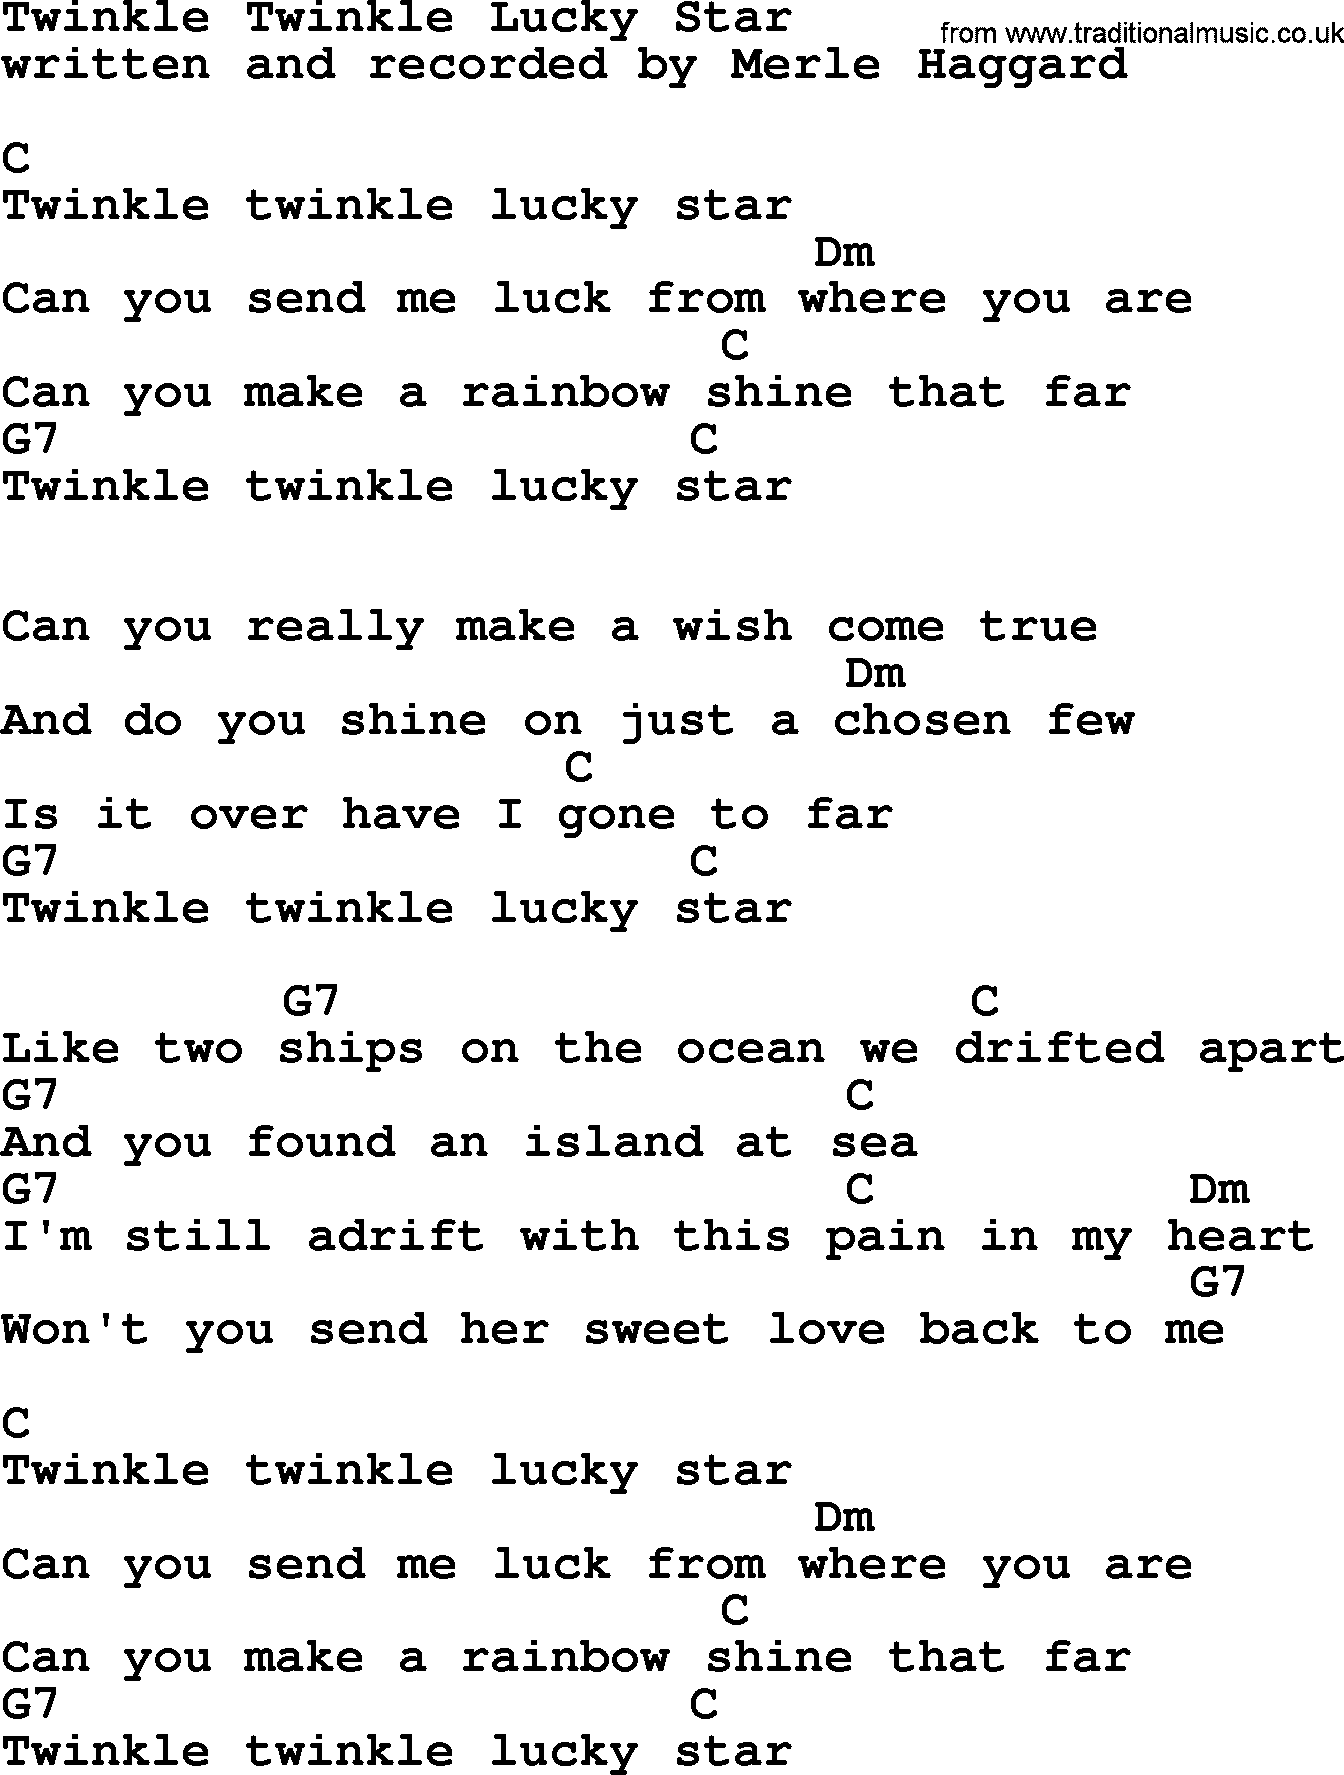 Merle Haggard song: Twinkle Twinkle Lucky Star, lyrics and chords